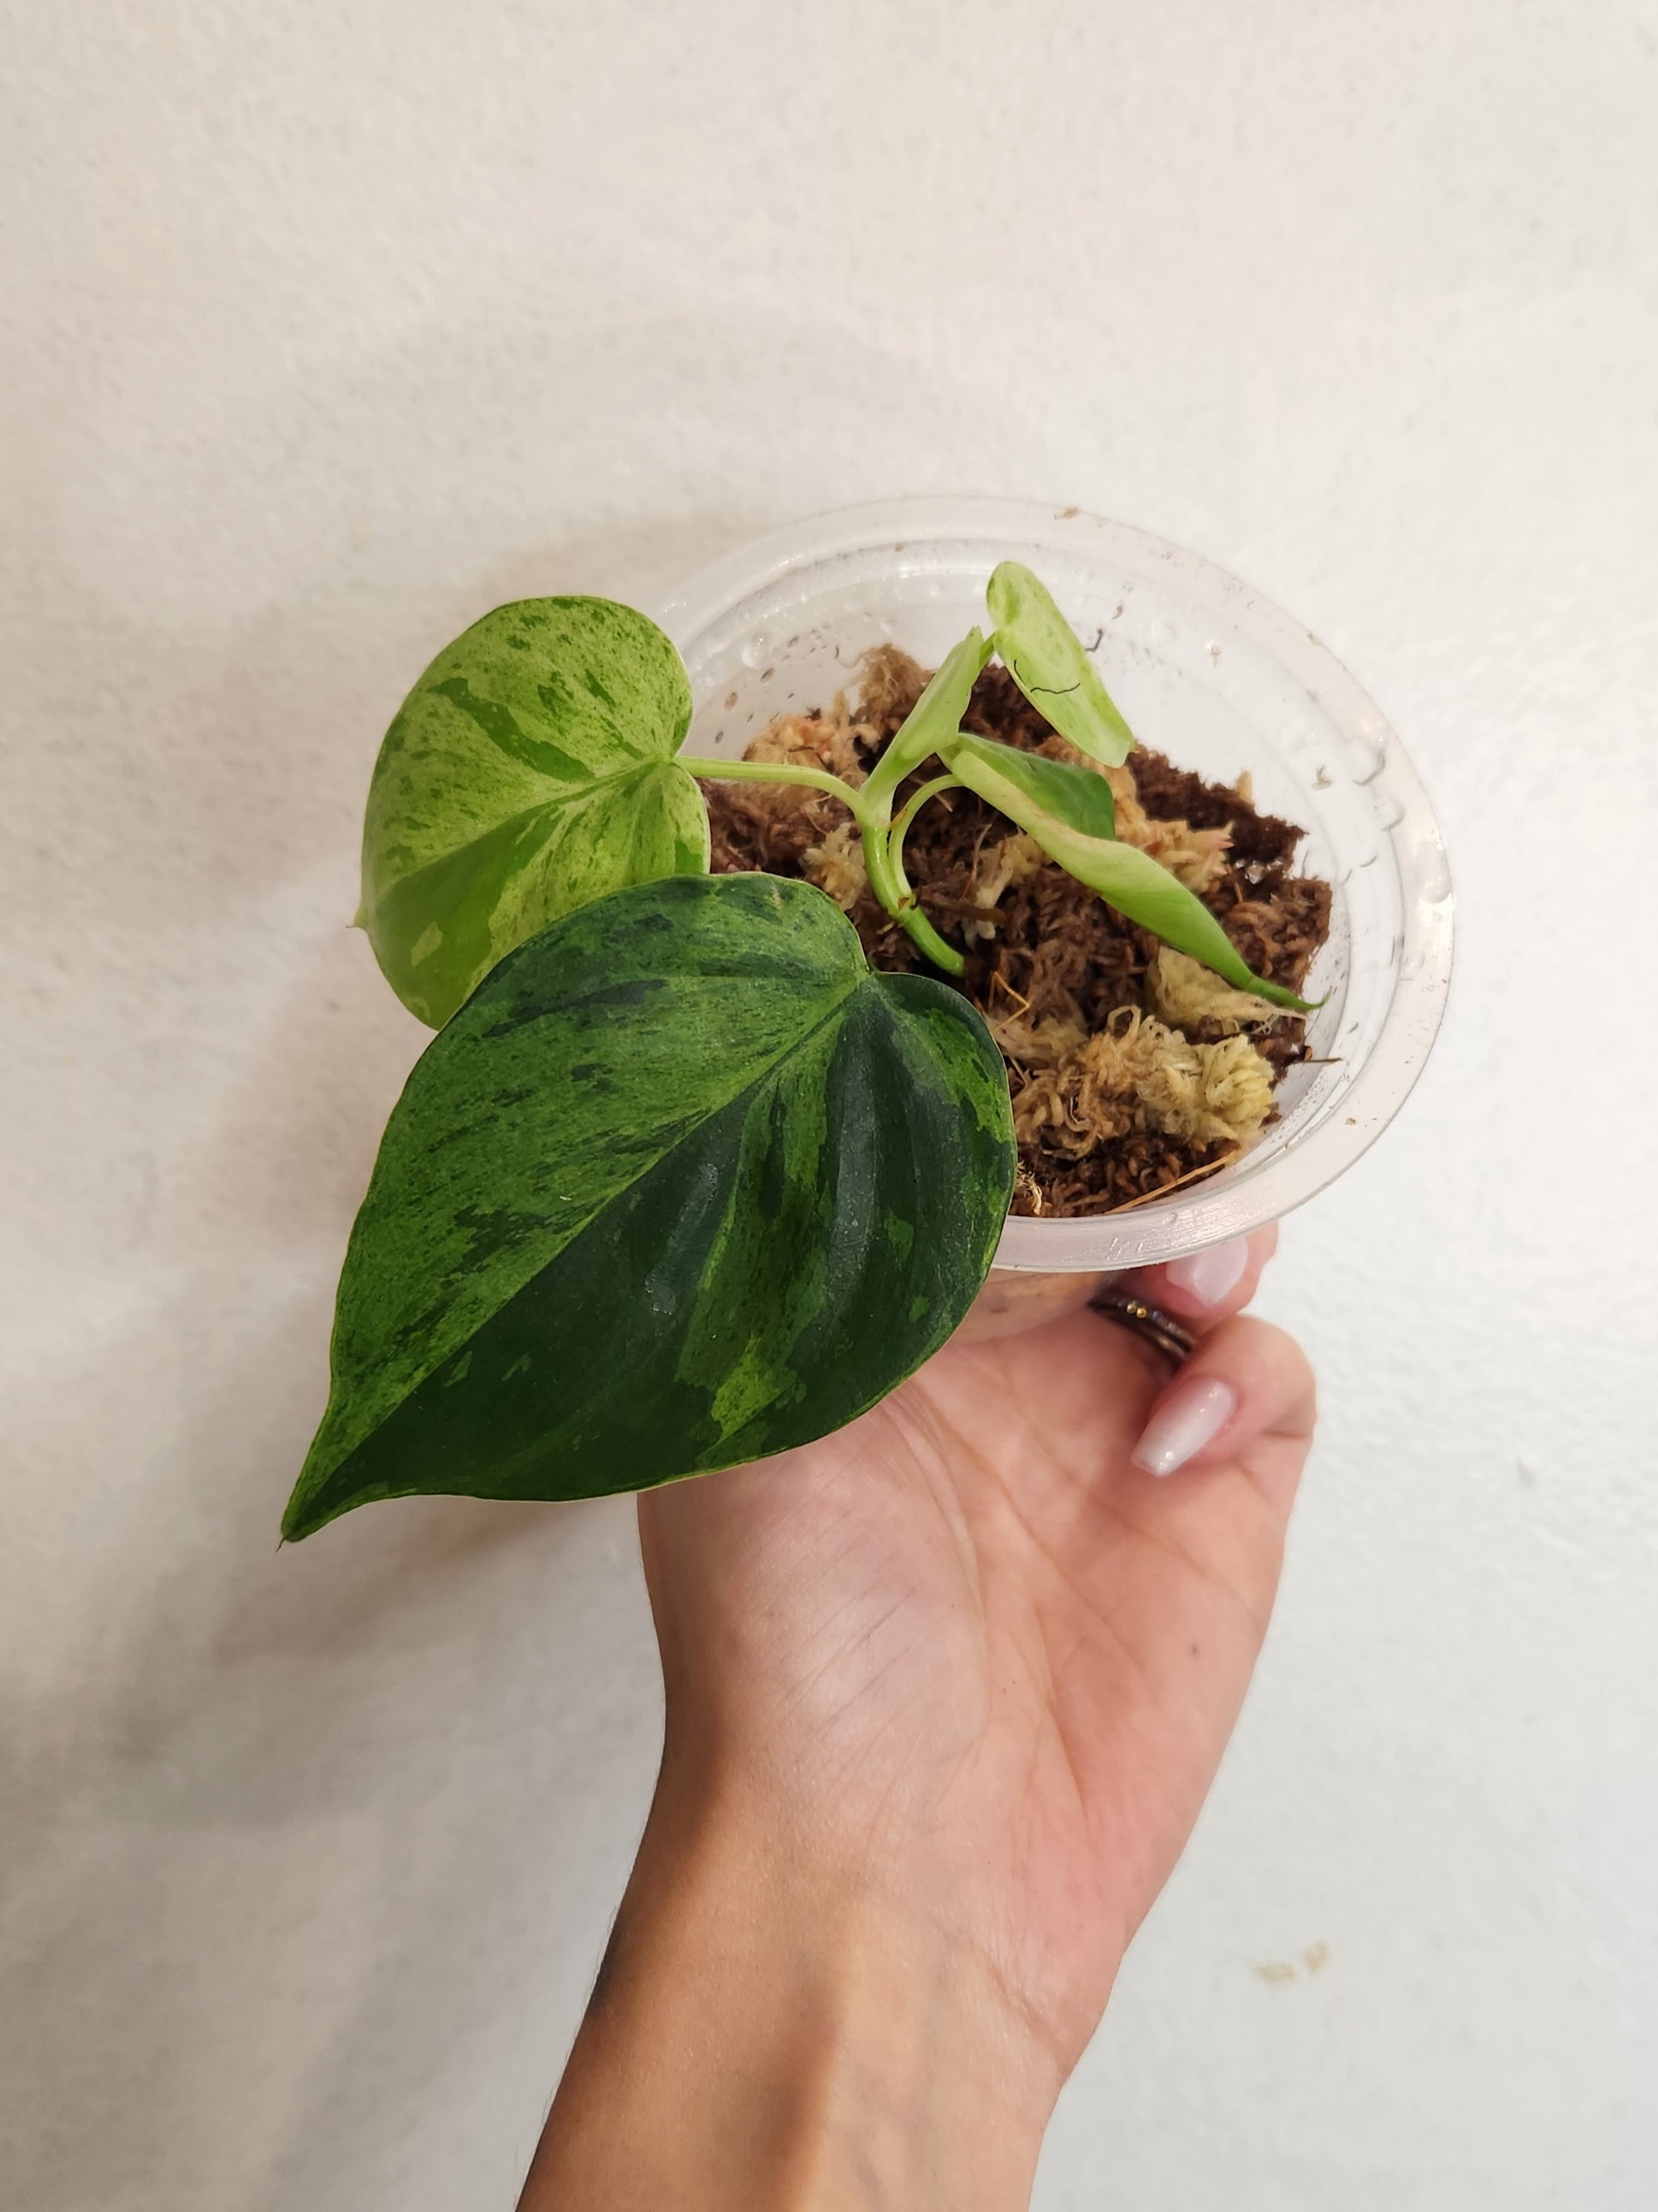 3" Philodendron Hederaceum Variegated 'Heart Leaf'